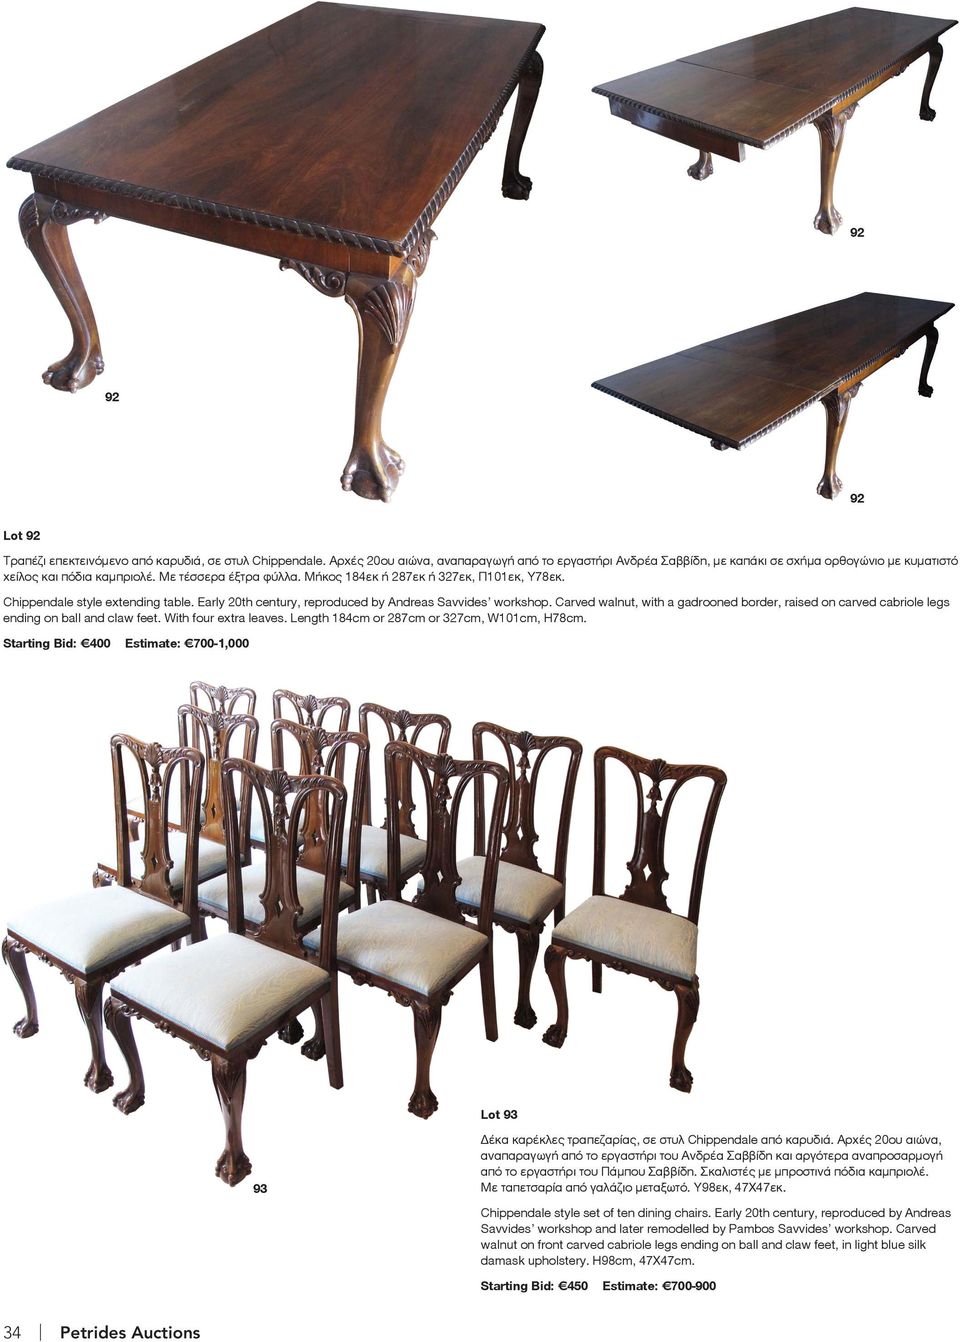 Chippendale style extending table. Early 20th century, reproduced by Andreas Savvides workshop. Carved walnut, with a gadrooned border, raised on carved cabriole legs ending on ball and claw feet.